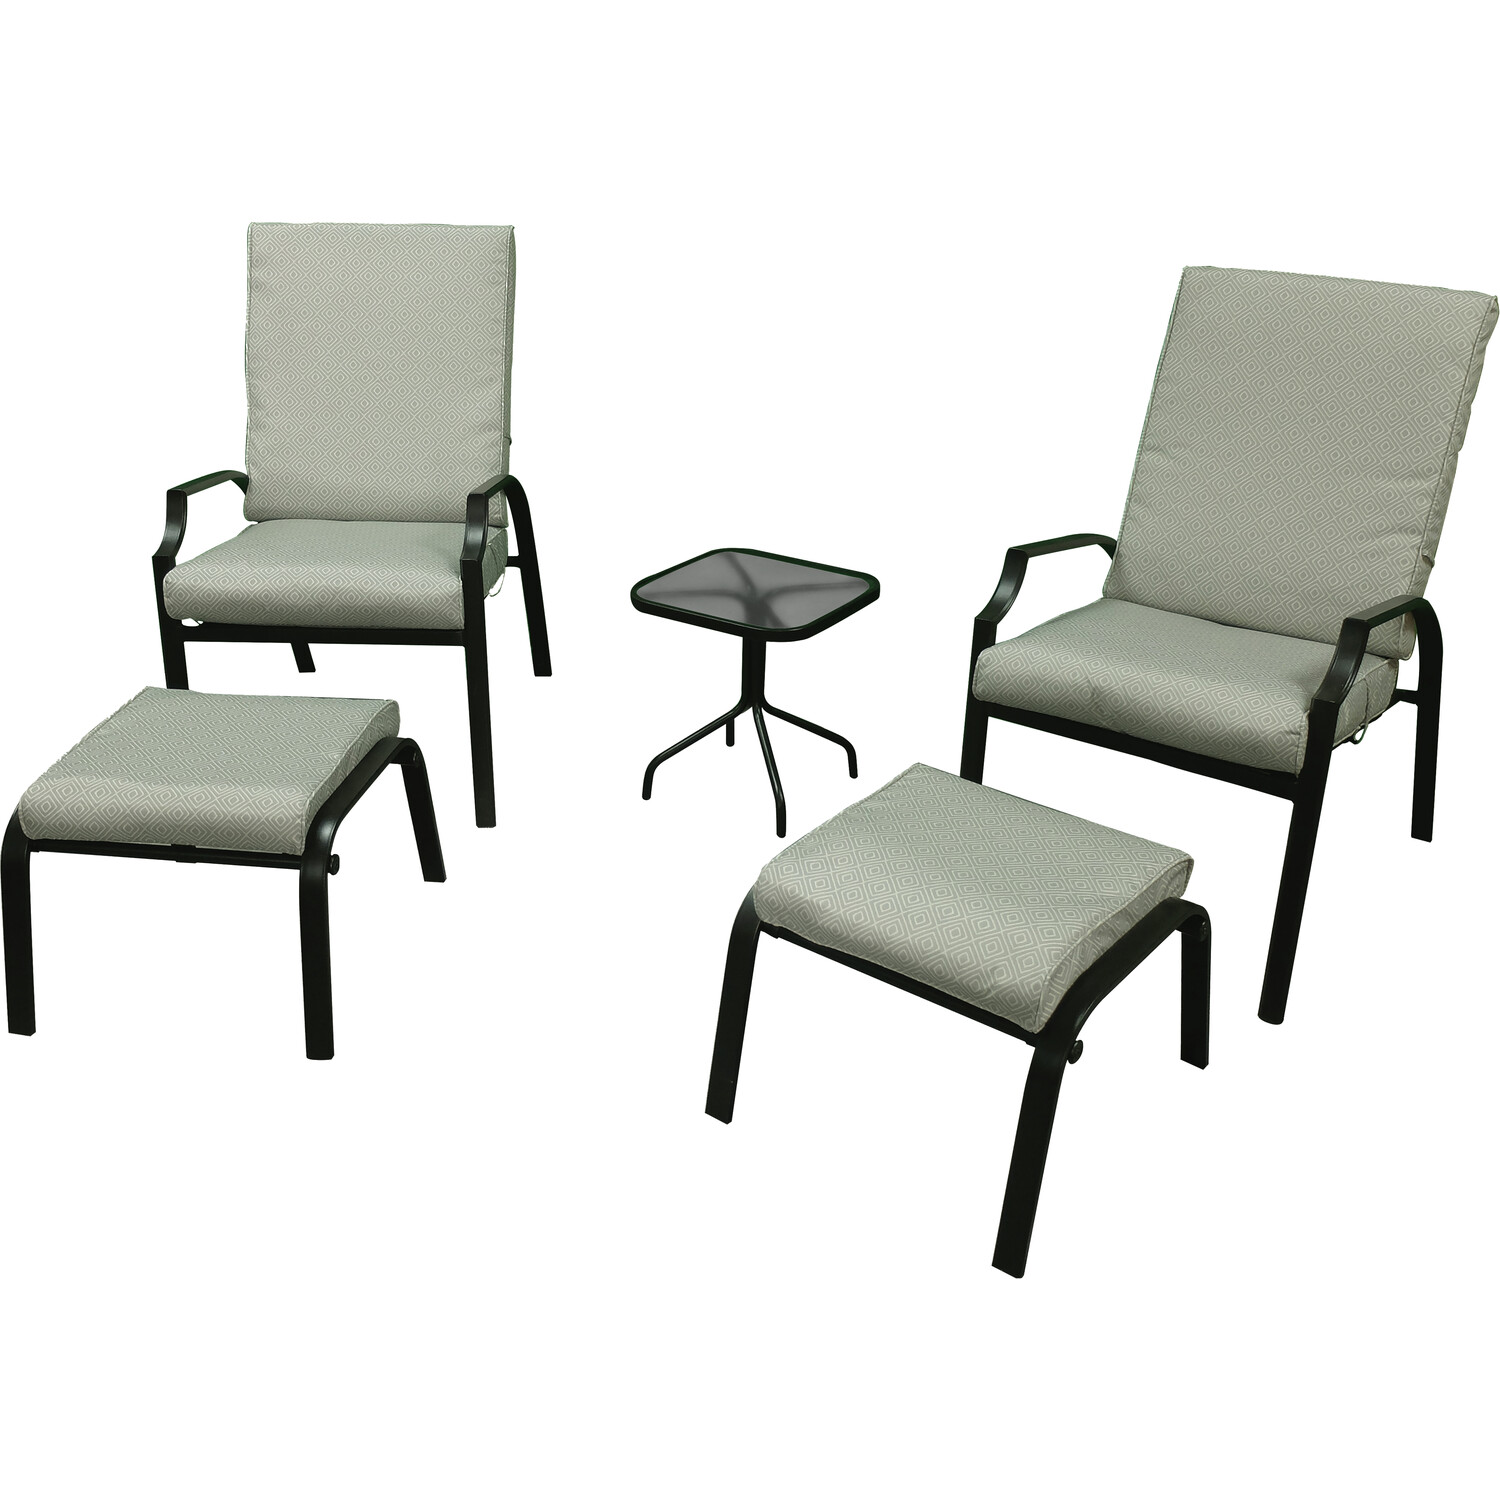 Malay Riviera Steel 2 Seater Bistro Set with Footstools Sage Image 2